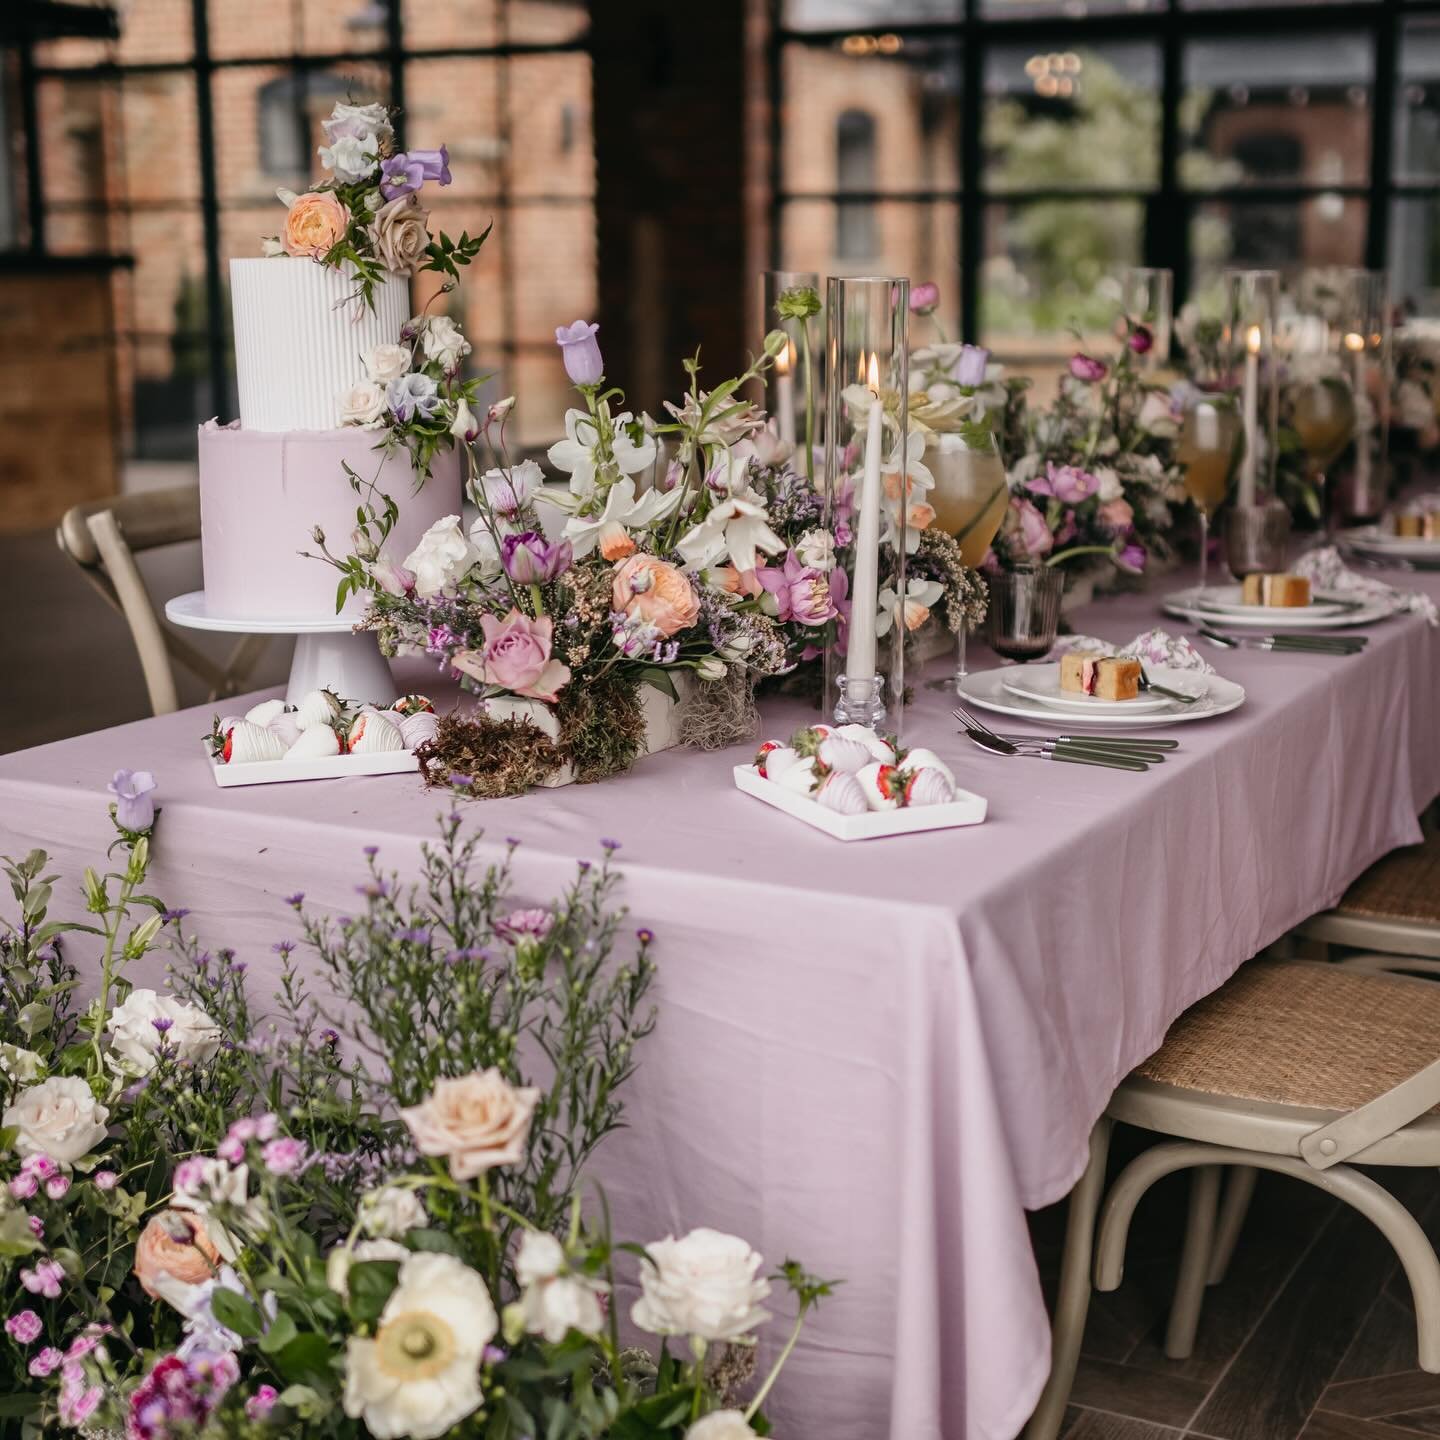 Working with talented suppliers can truly make the process of creating the perfect aesthetics in a beautiful venue an absolute joy. The collaboration and expertise that these professionals bring to the table can elevate any event or project to new he